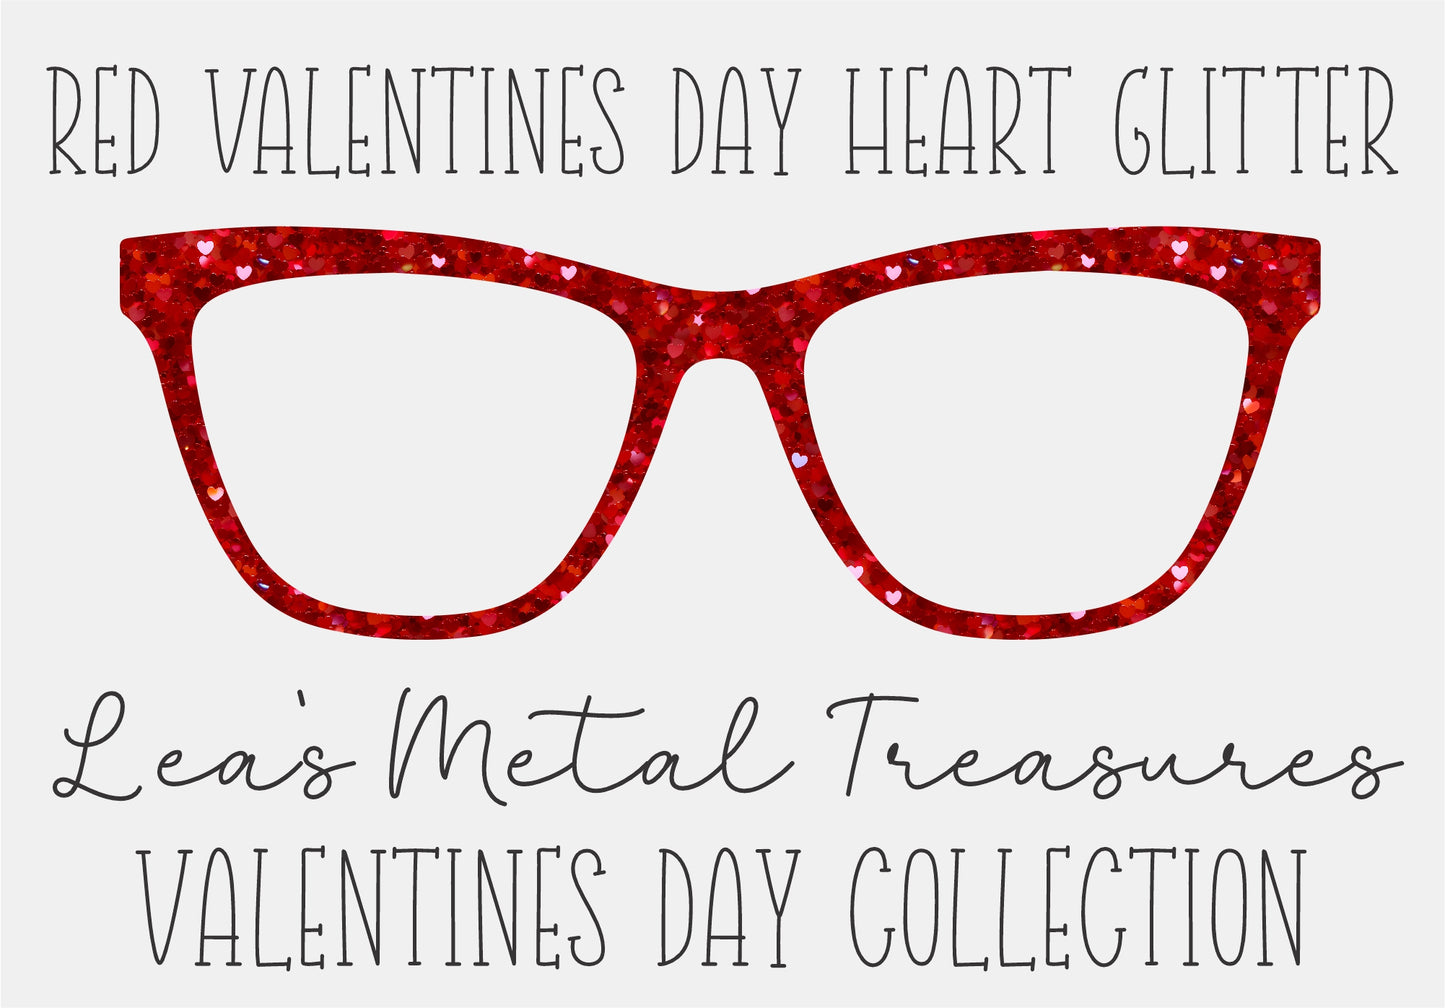 RED VALENTINES DAY Heart Glitter Eyewear Frame Toppers COMES WITH MAGNETS